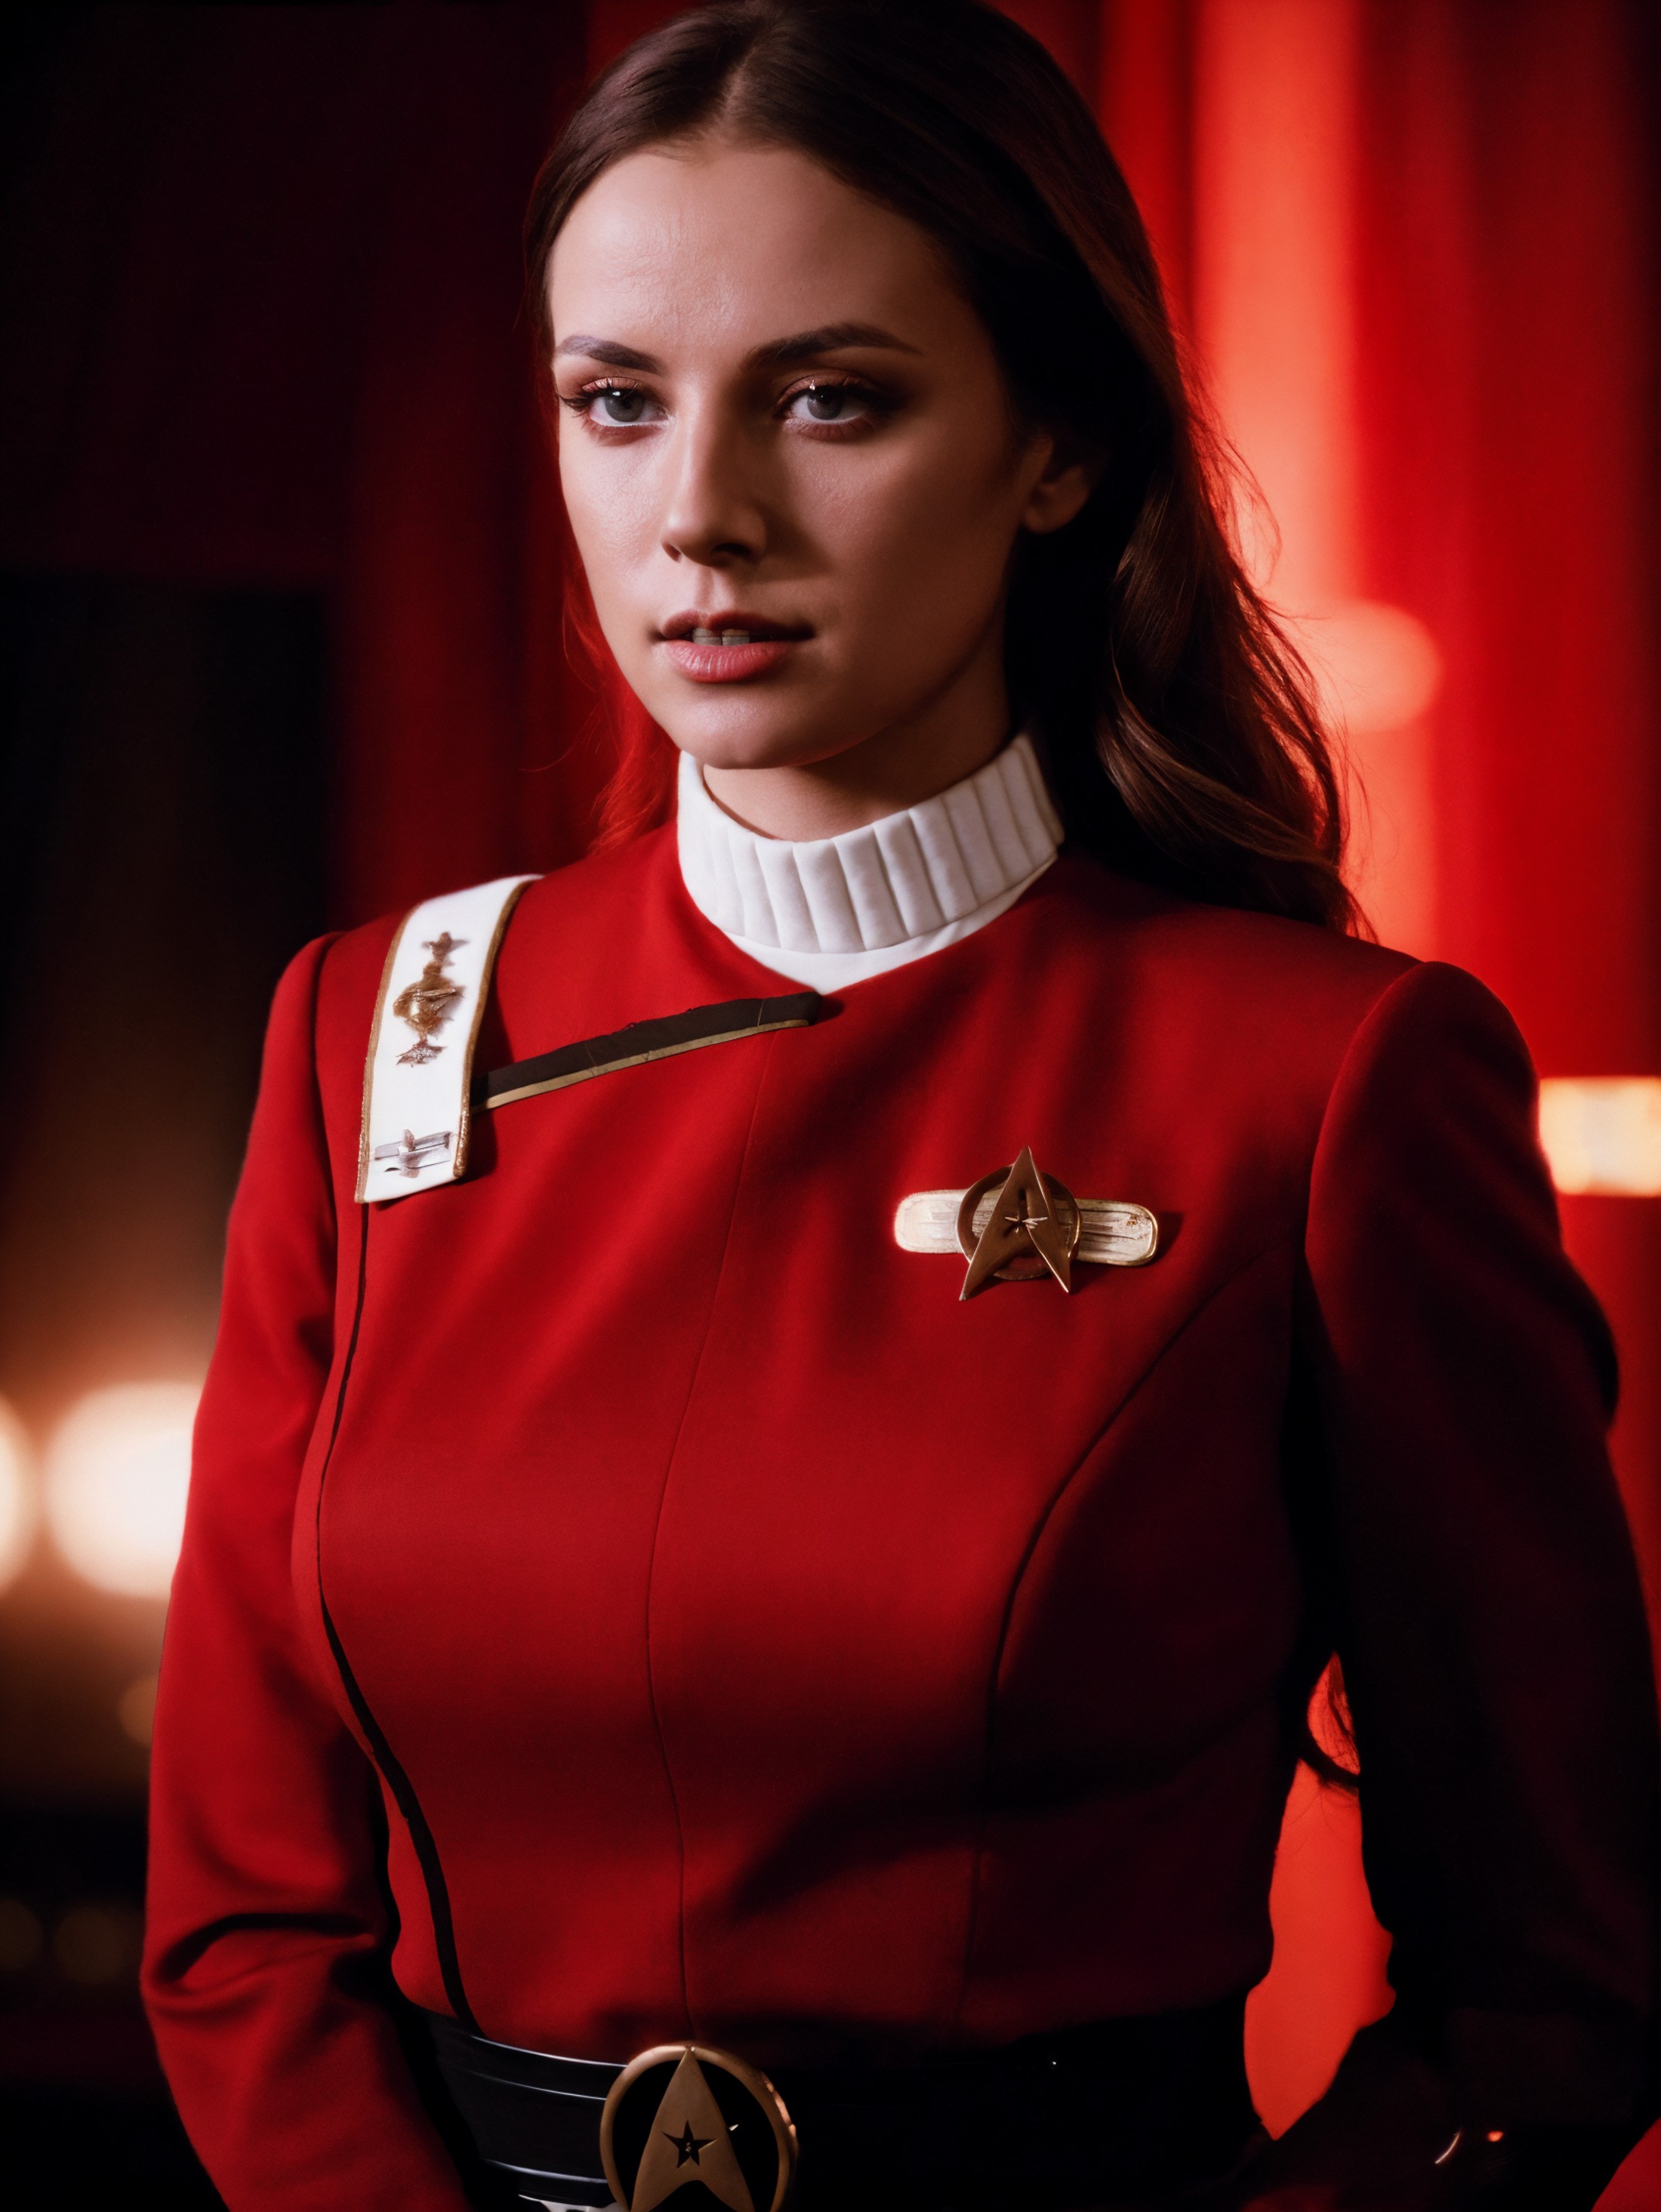 woman in twokunf red uniform,professional photograph of a stunning woman detailed, sharp focus, dramatic, award winning, c...